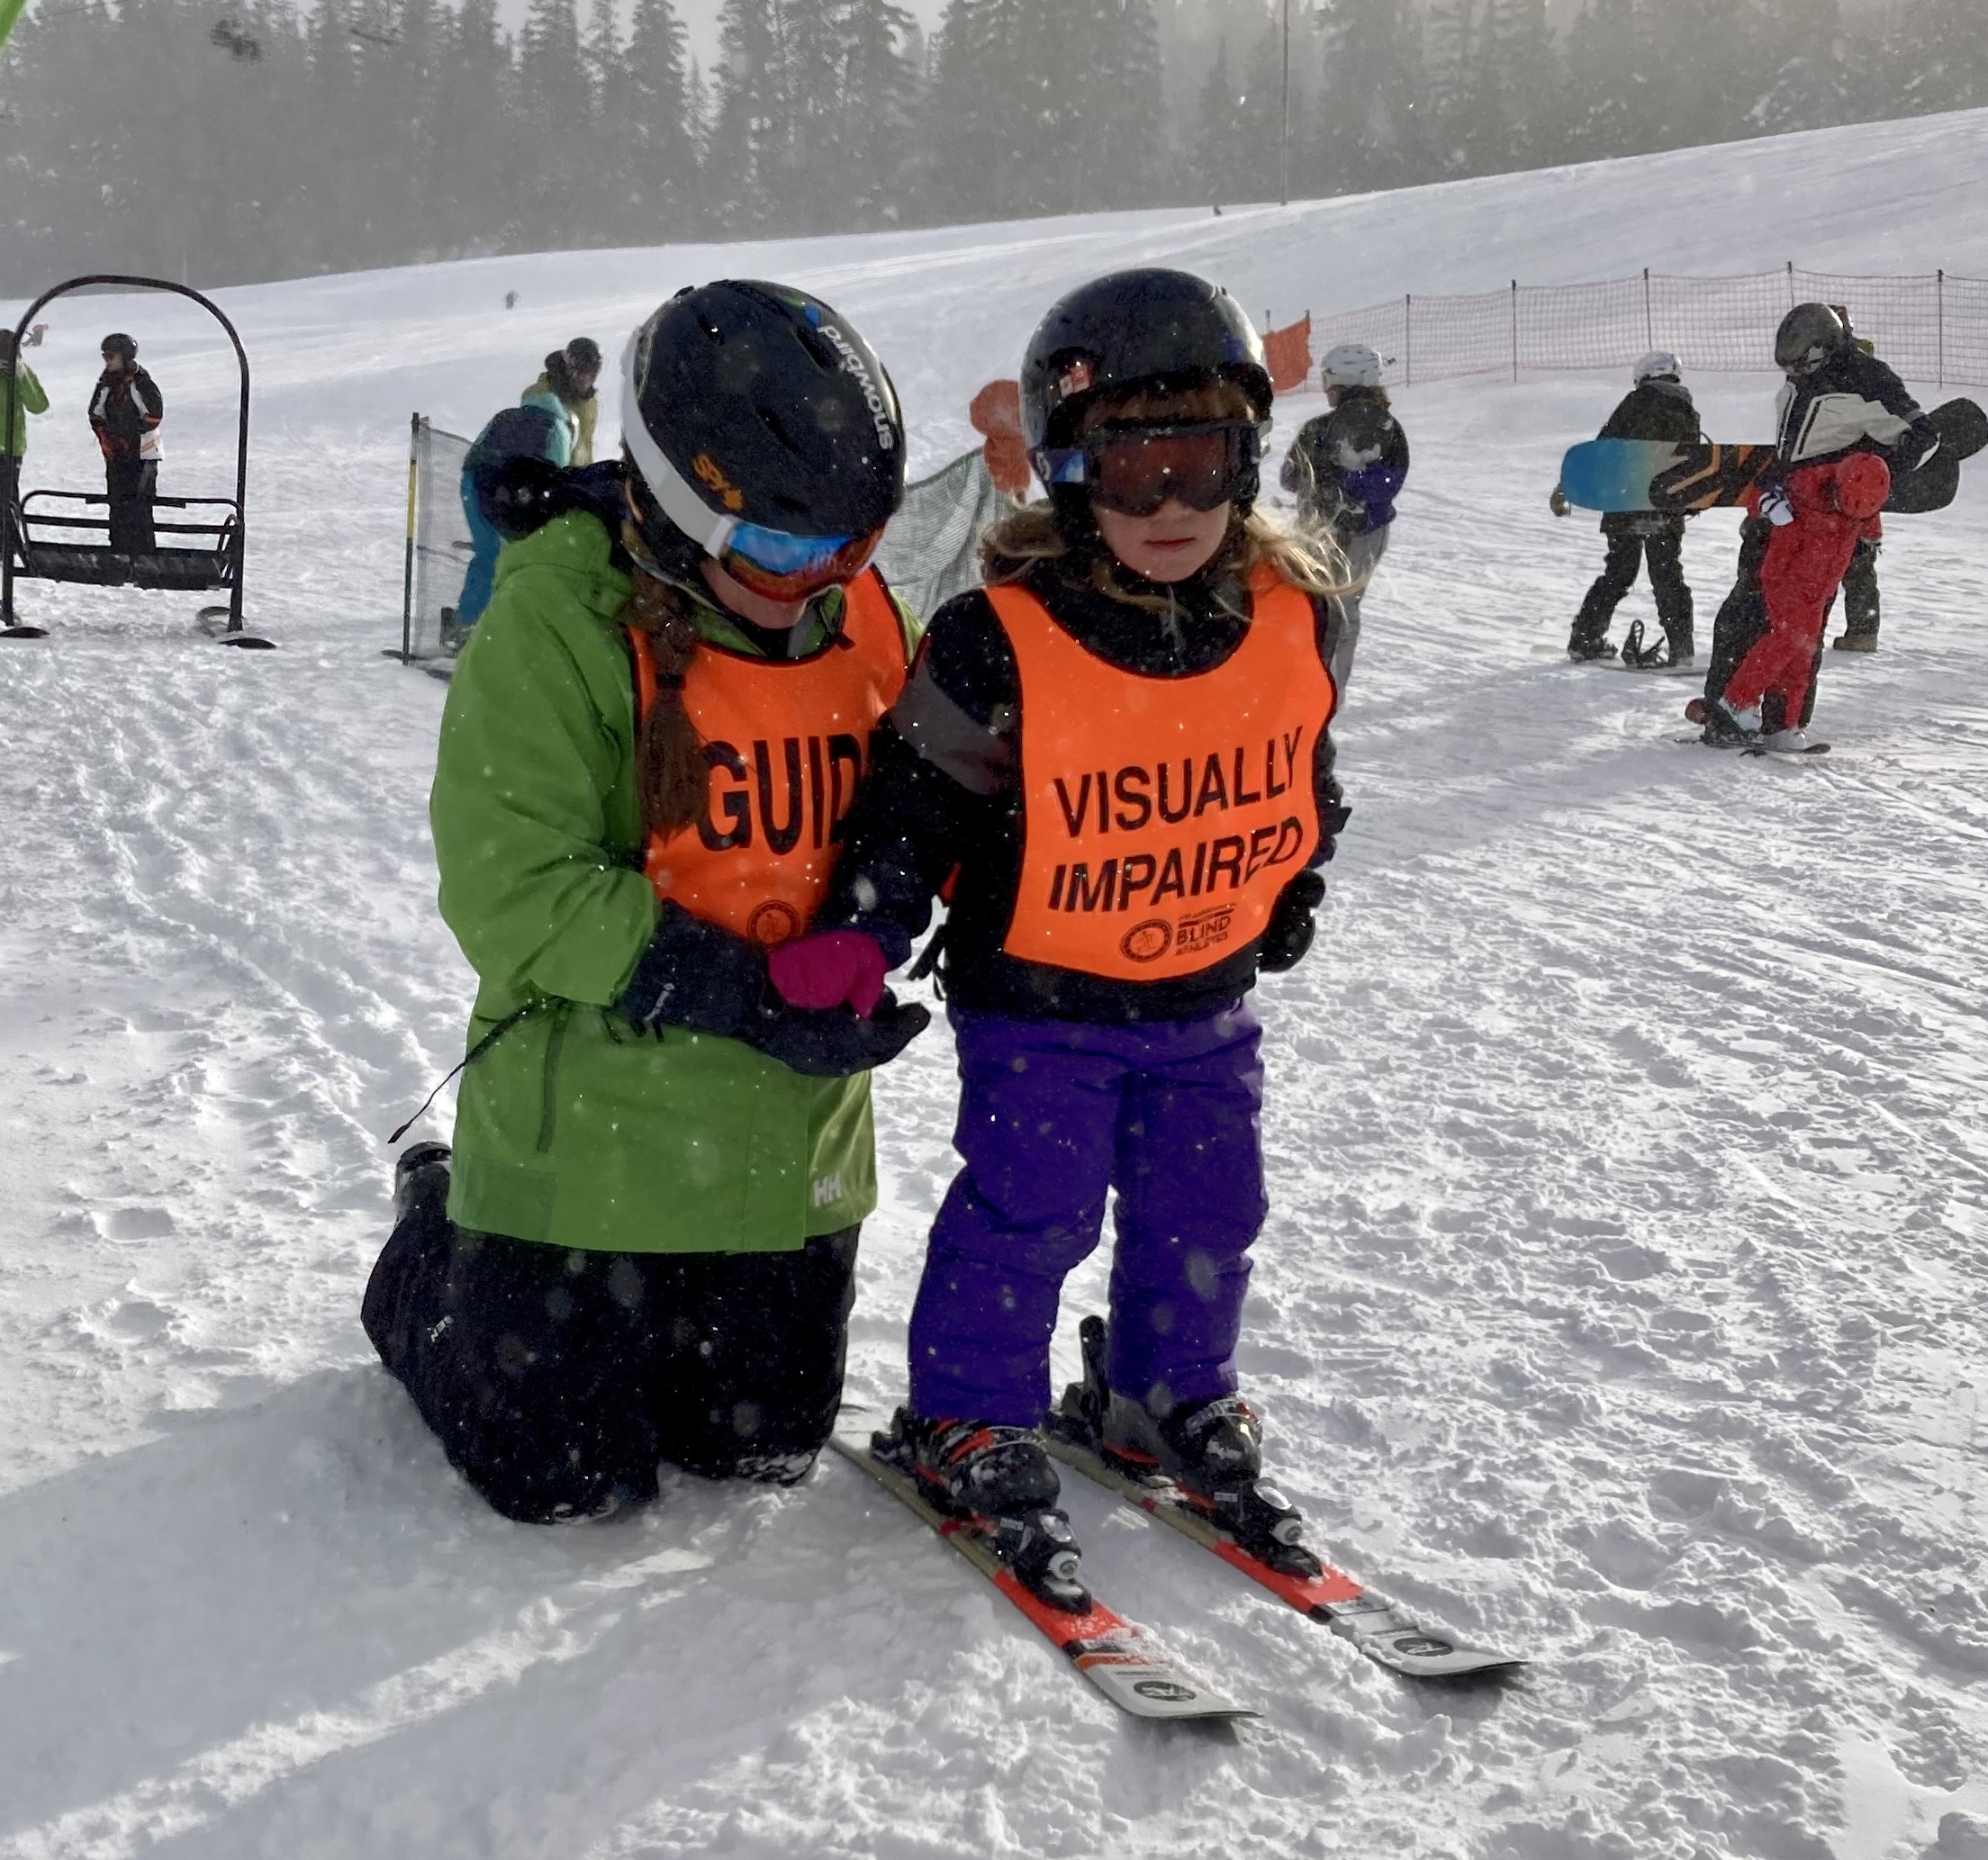 Young athlete on skiis wearing purple pants, a black helmet, goggles and an orange safety vest. An adult guide is behind the athlete on her knees holding her hand for stability. The guide is wearing a green ski jacket, helmet and goggles. Other skiers and snowboarders are walking behind them.